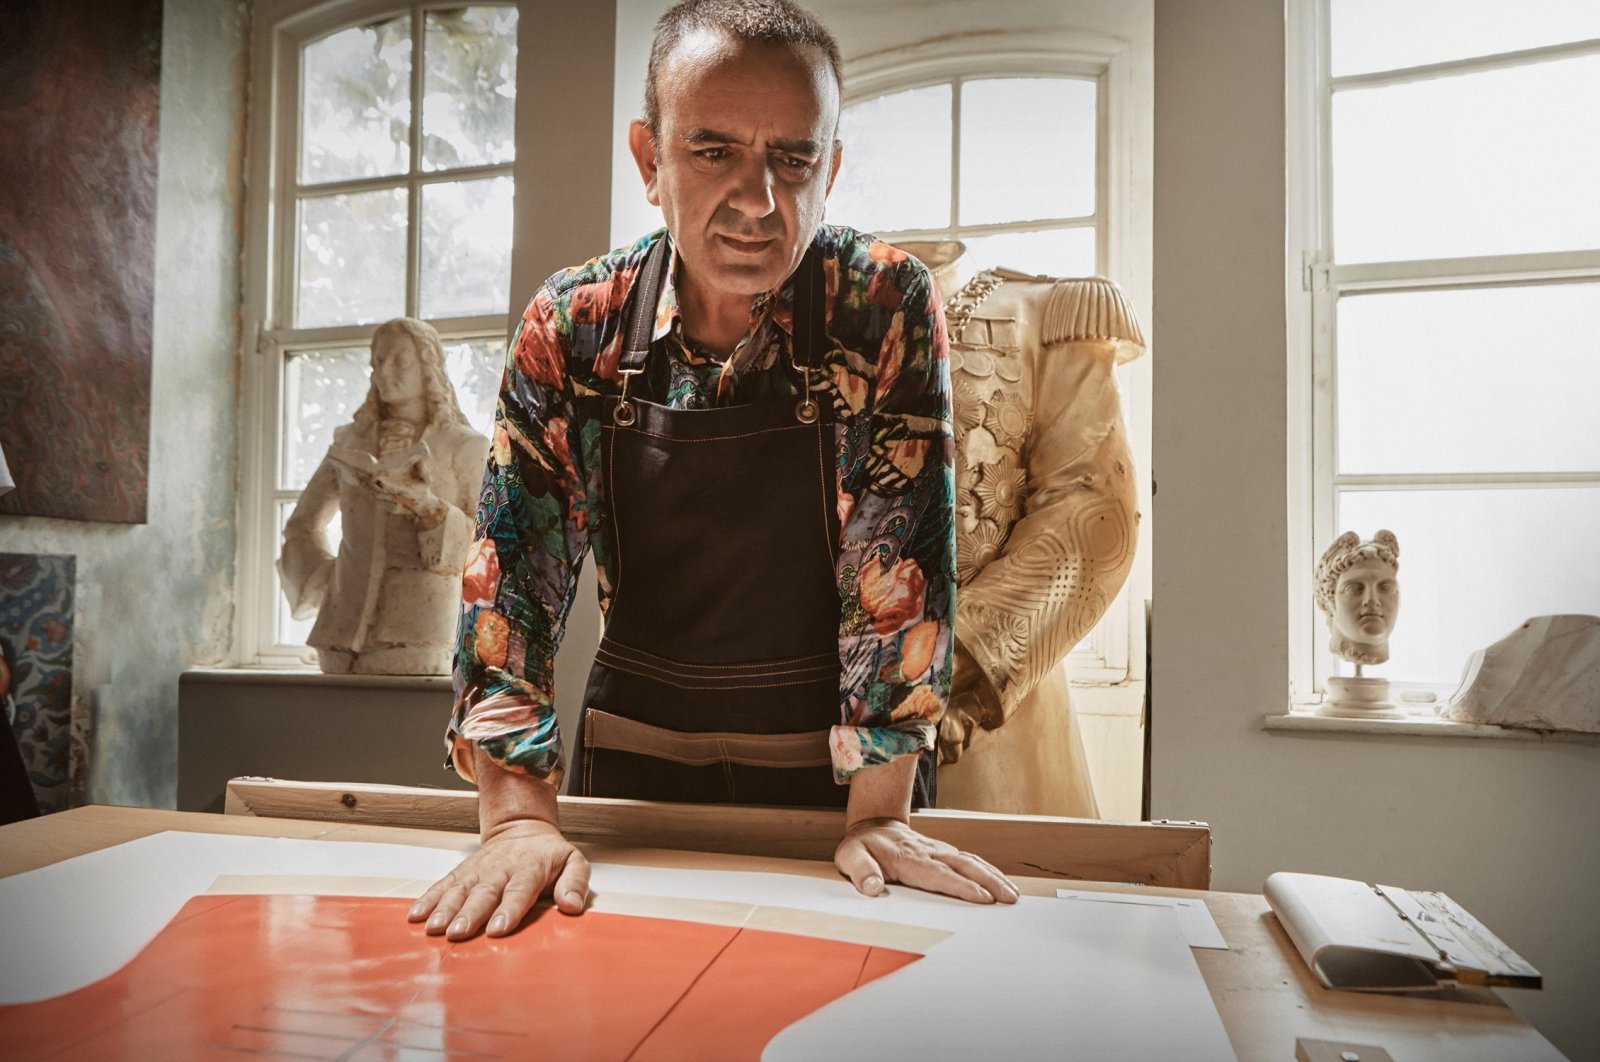 Ismail Acar works on the &quot;Kaftan&quot; series prepared for Turkish e-commerce platform Trendyol&#039;s art project, July 26, 2022. (Photo courtesy of Art for Goodness Association)